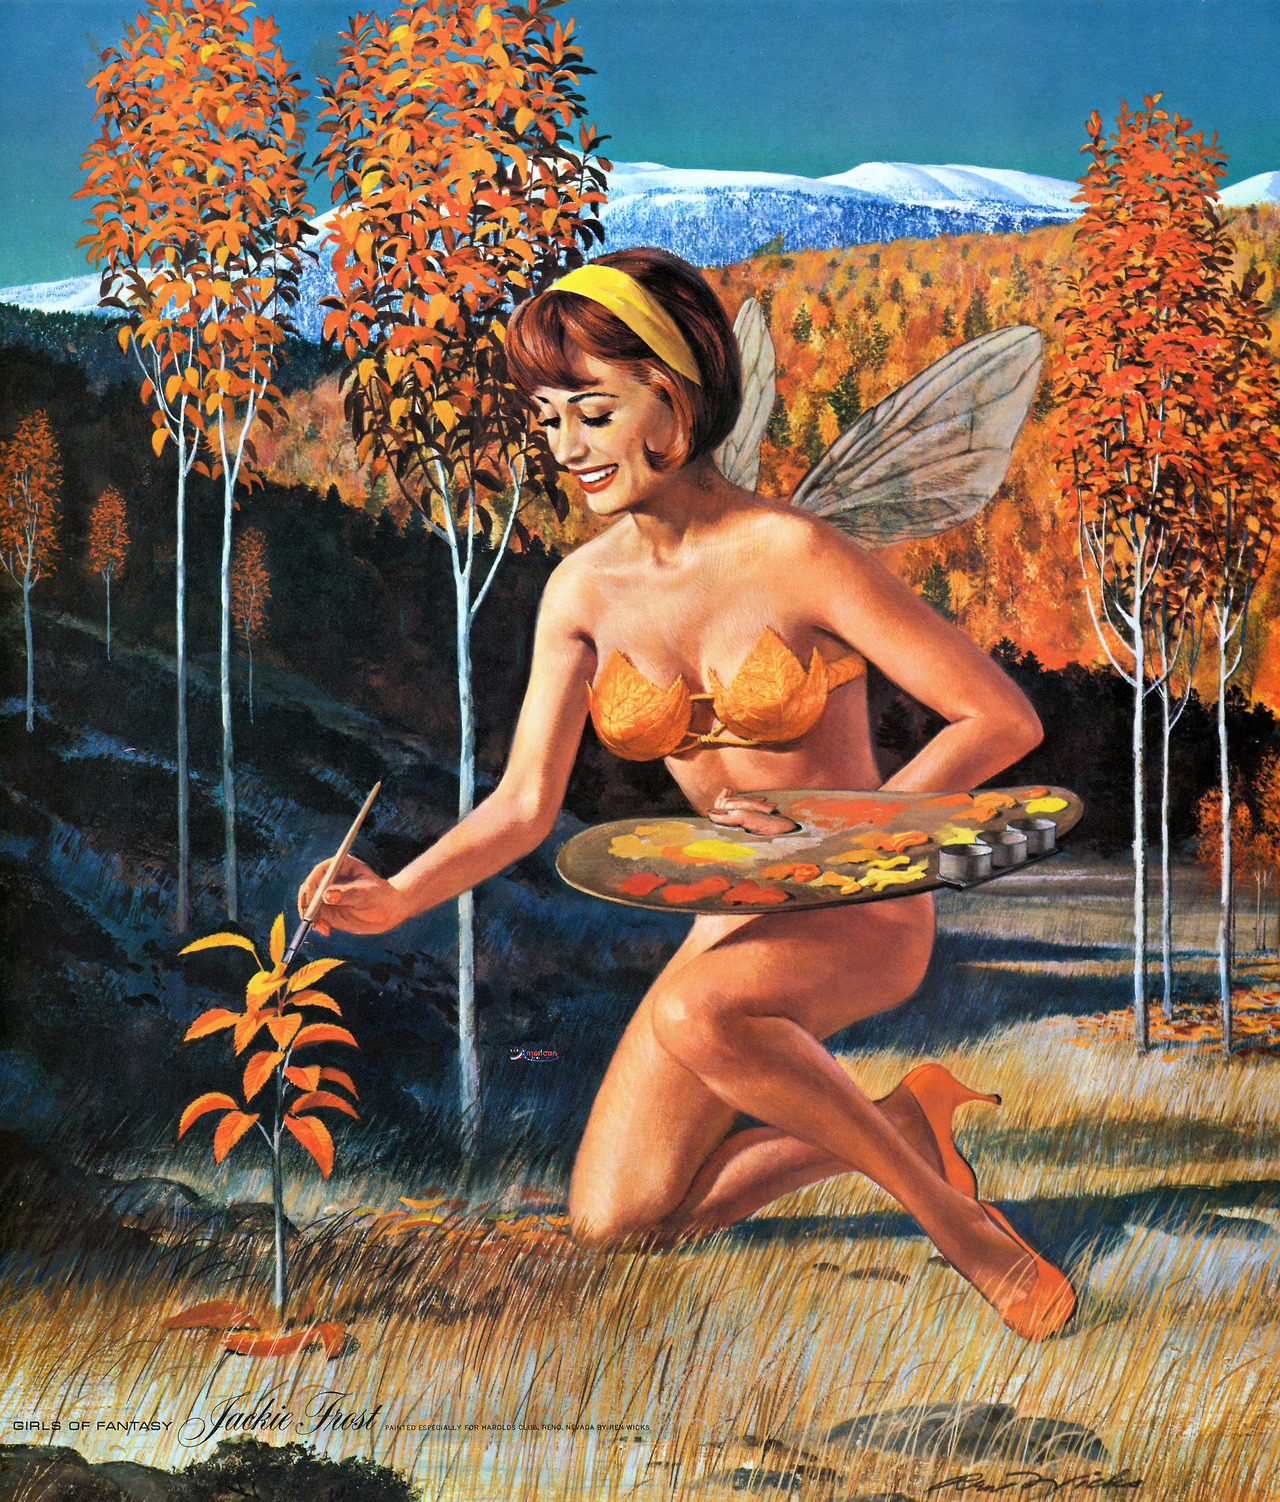 lovethepinups:Happy First Day of Fall!   Ren Wicks - “Jackie Frost” - September/October